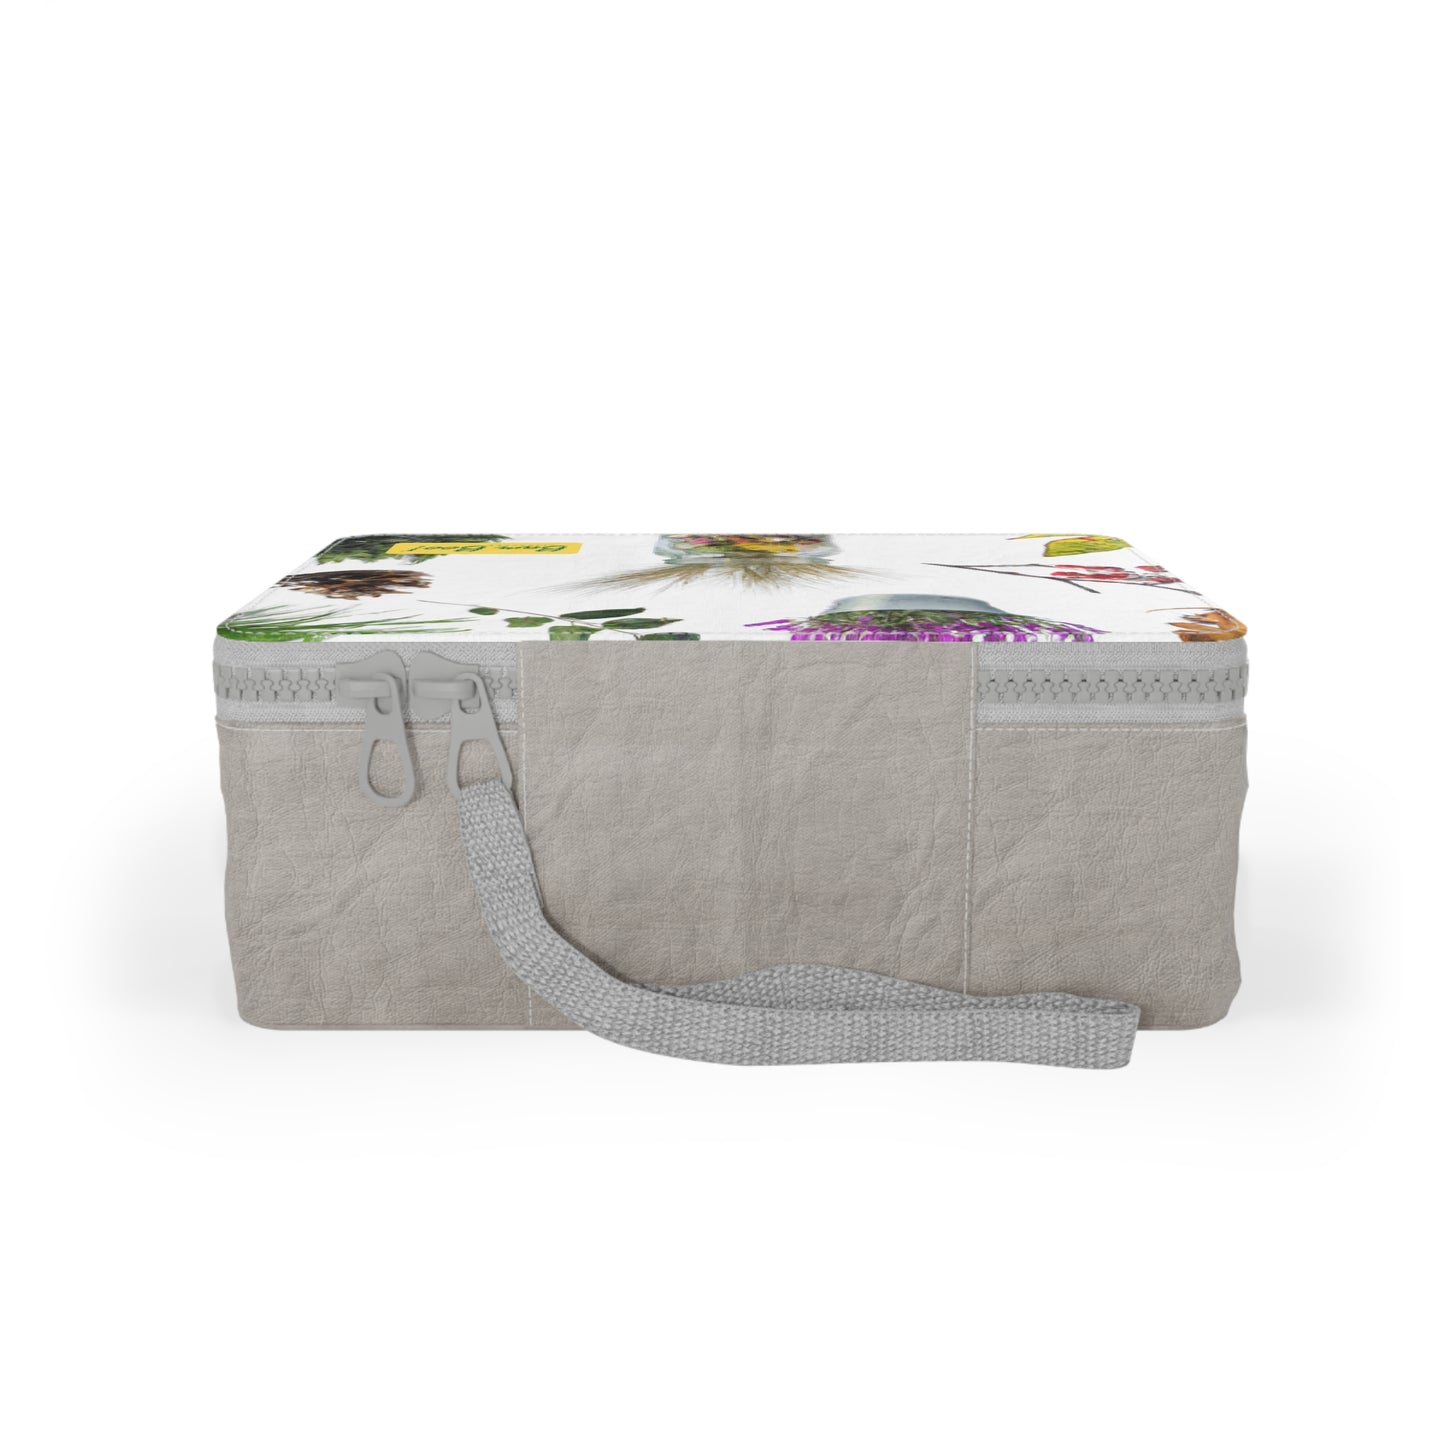 "A Nature Collage: Celebrating the Beauty of the Outdoors" - Bam Boo! Lifestyle Eco-friendly Paper Lunch Bag